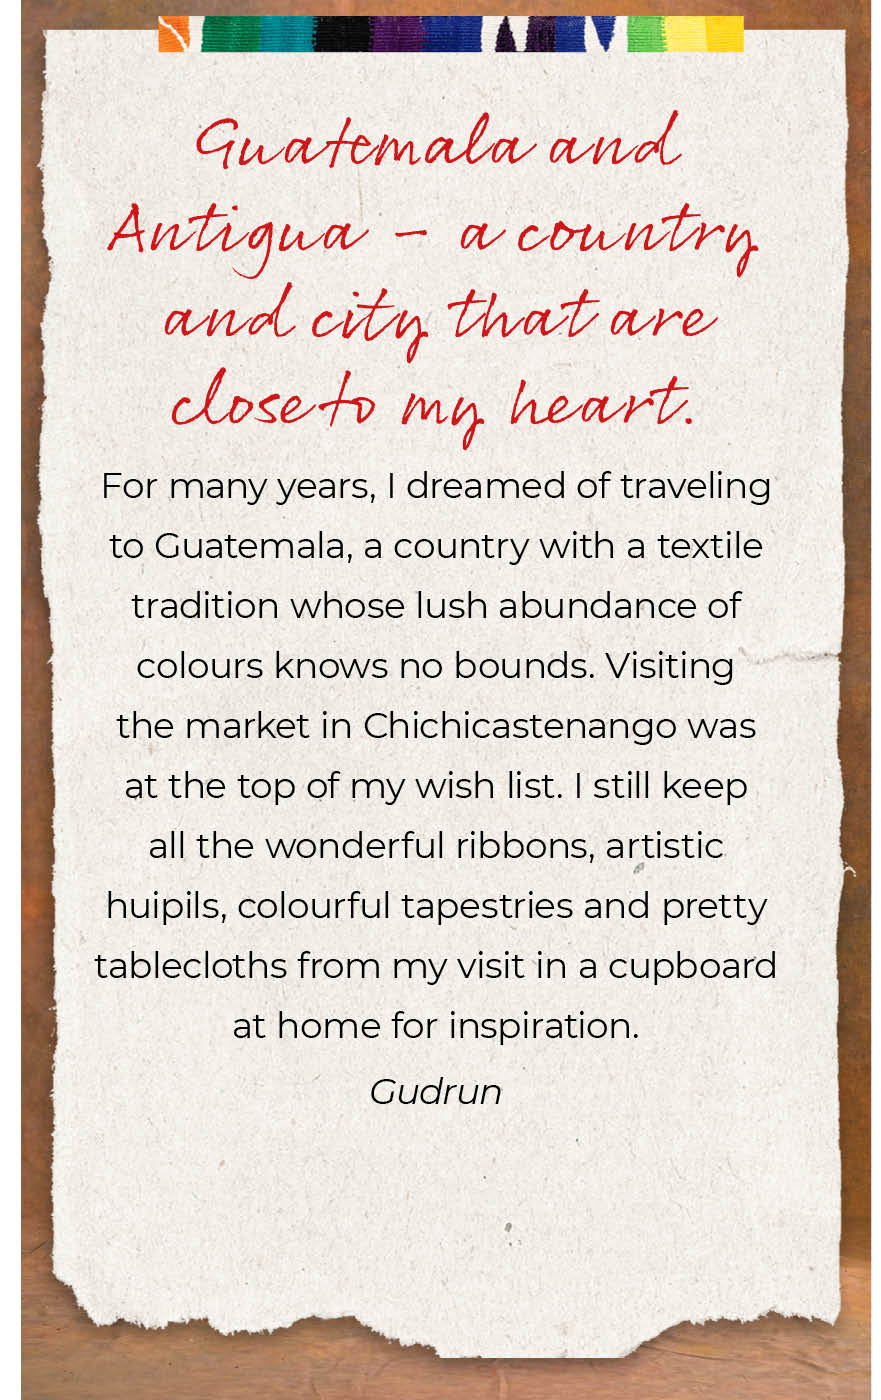 Guatemala and Antigua – a country and city that are close to my heart.